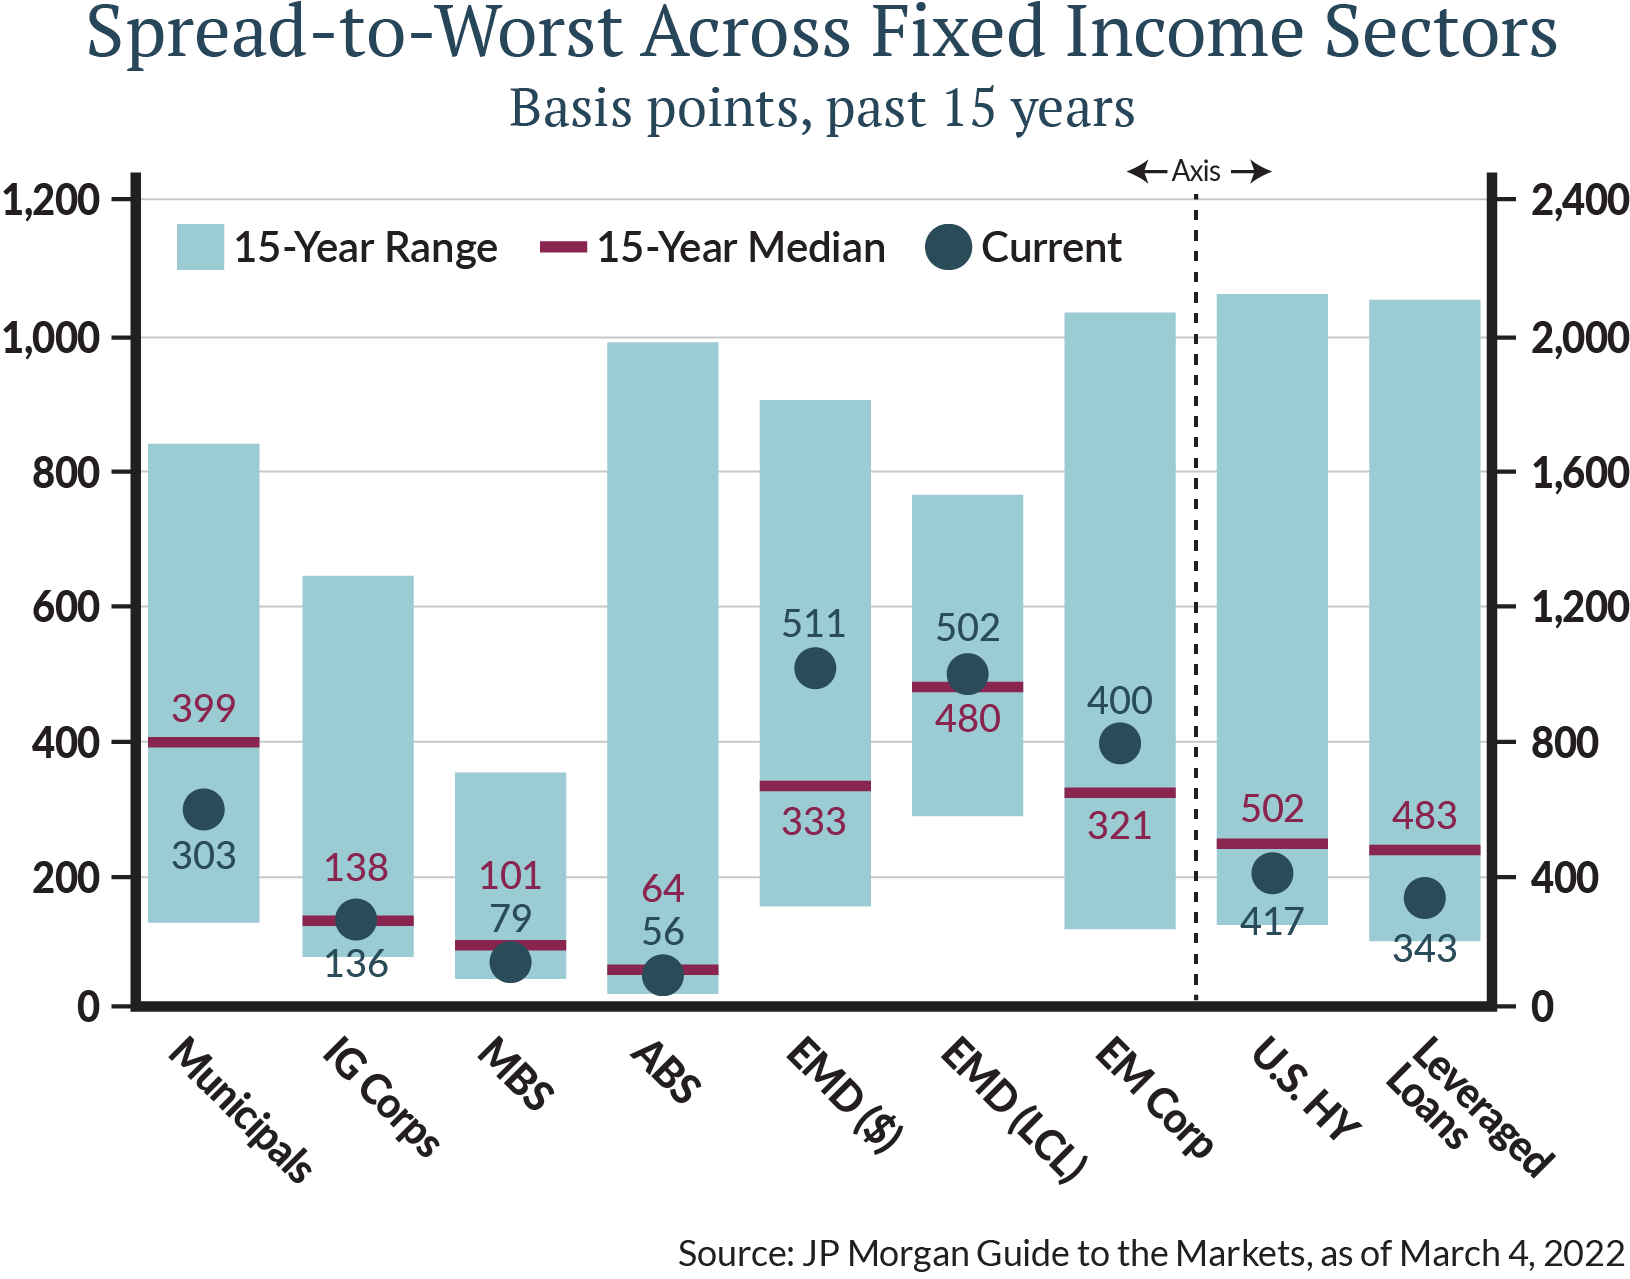 We believe that EM bonds represent significant value compared to other bond sectors, with a yield spread well above the 15-year average depicted in the chart